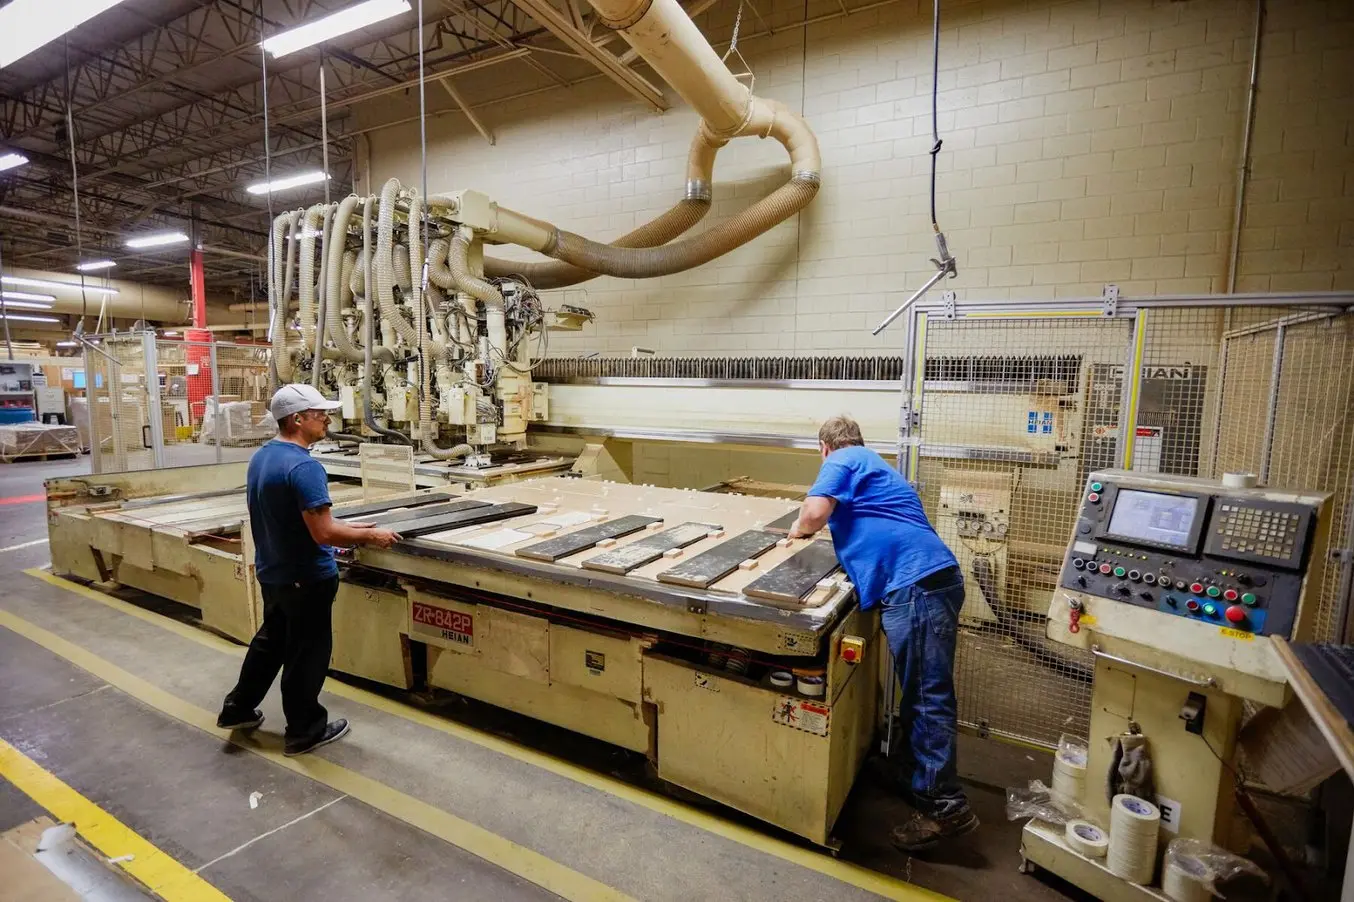 Two people in blue shirts work at the Ashley Furniture factory